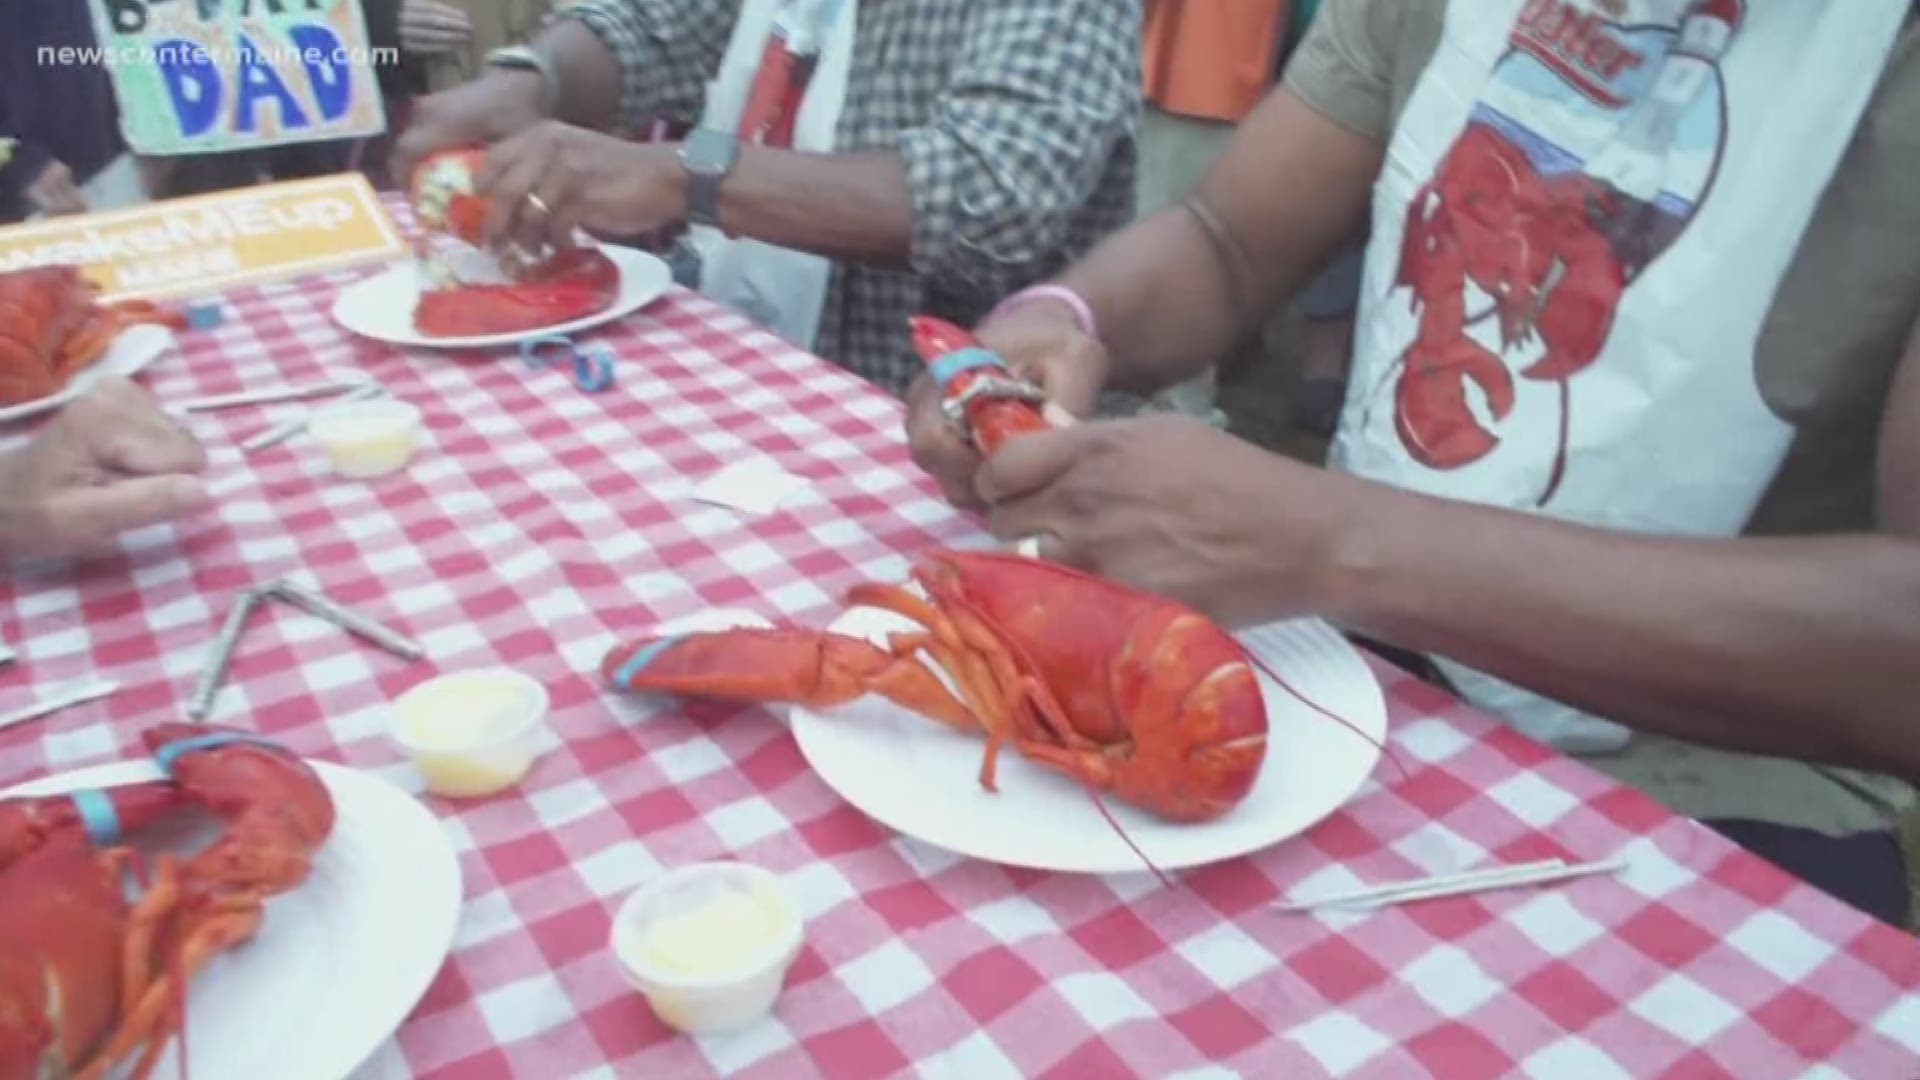 Lee Nelson and Todd Gutner eat Lobster with Al Roker and Craig Melvin at Sagadahoc Bay Campground in Georgetown, Maine